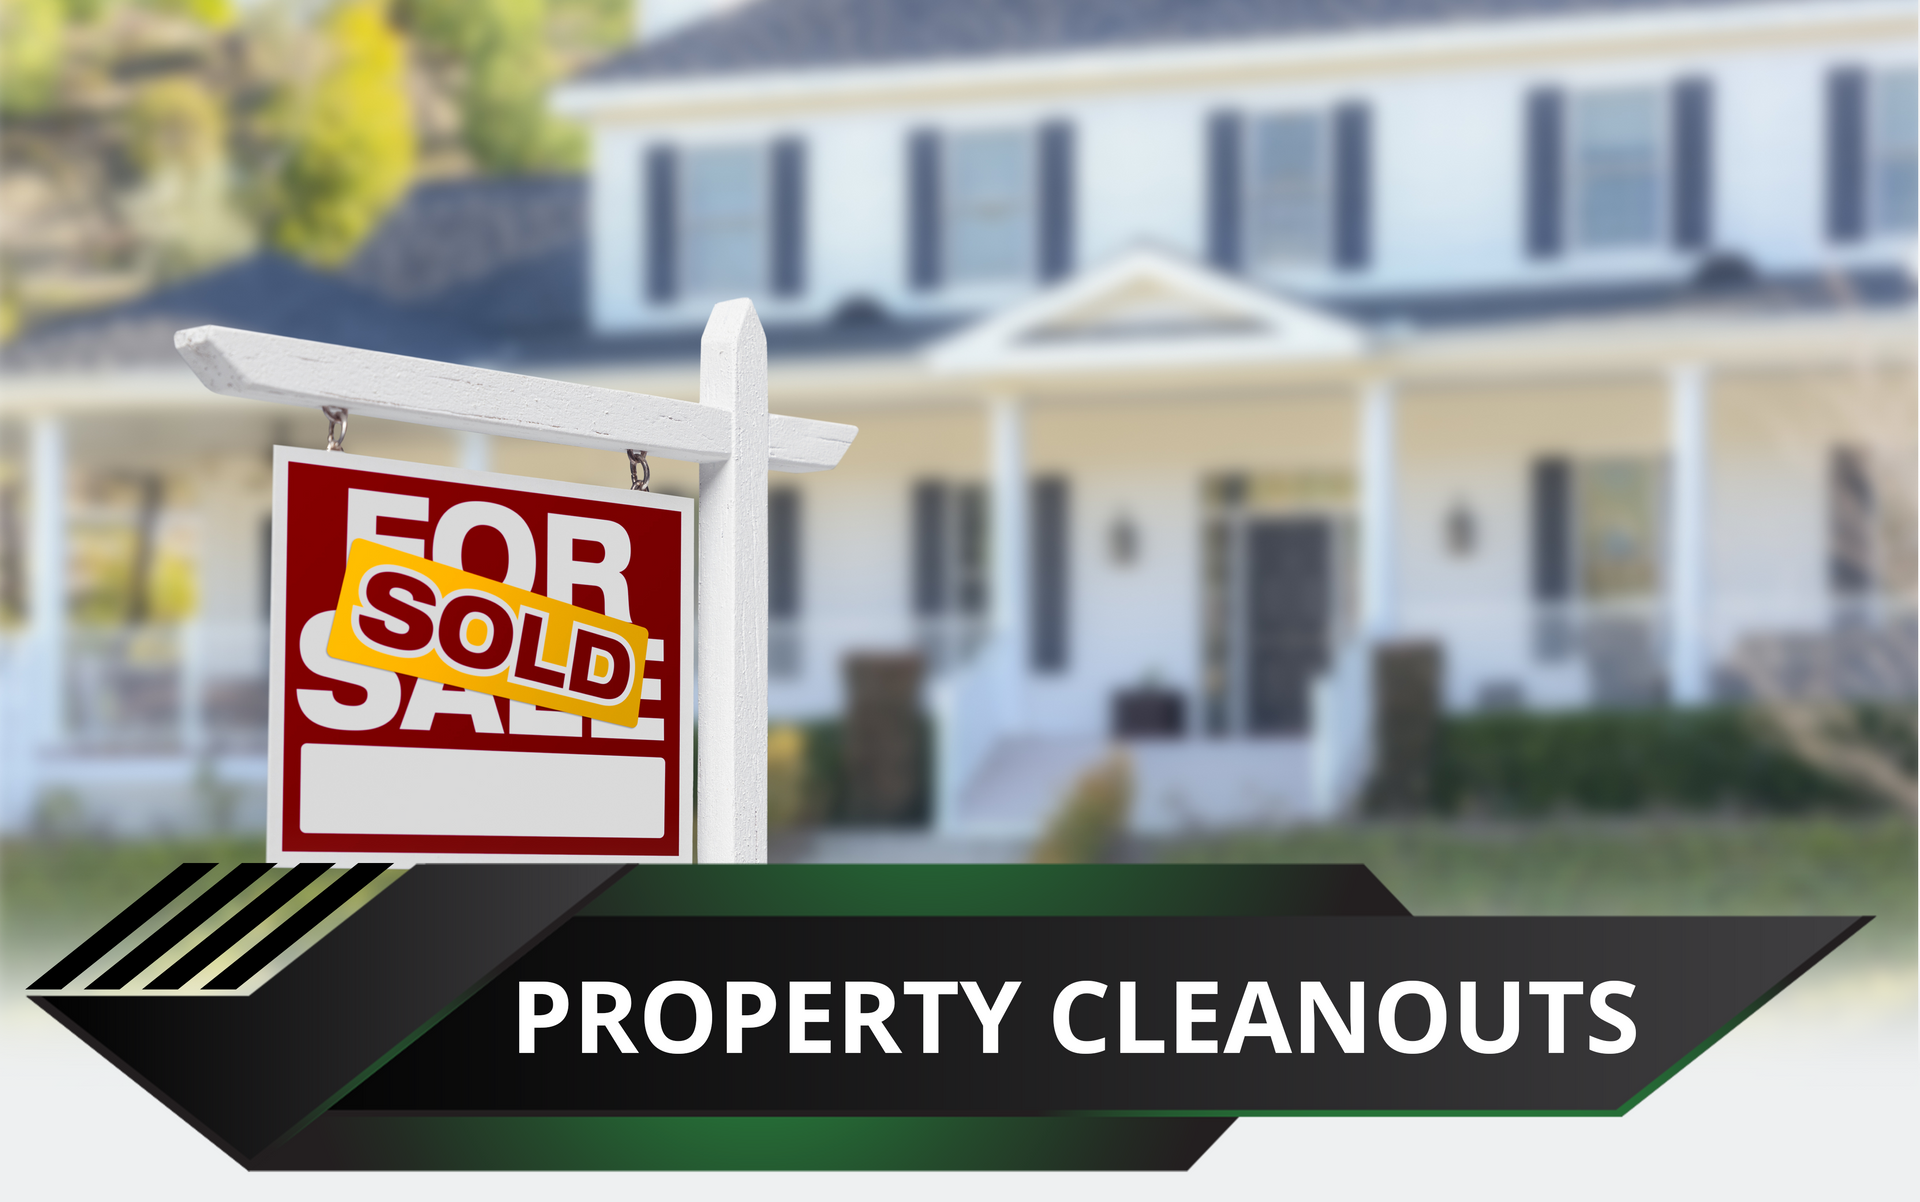 Property Cleanouts in Madera, CA